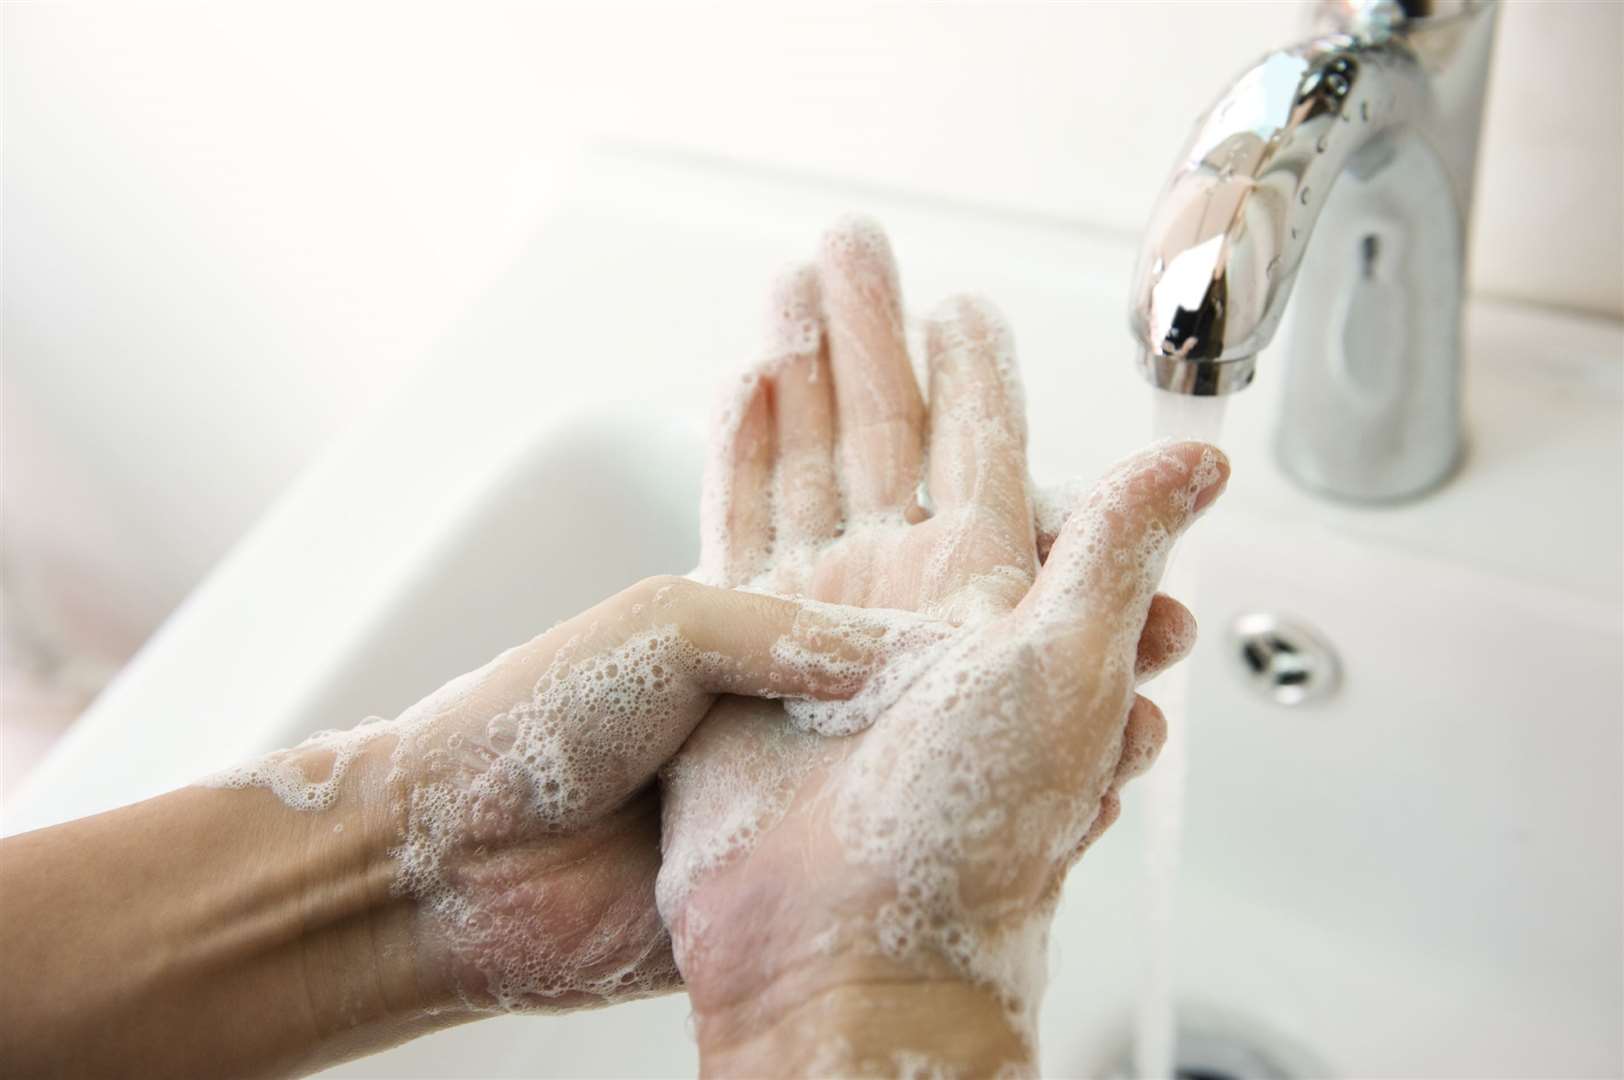 Health officials want to see people maintaining good hand hygiene